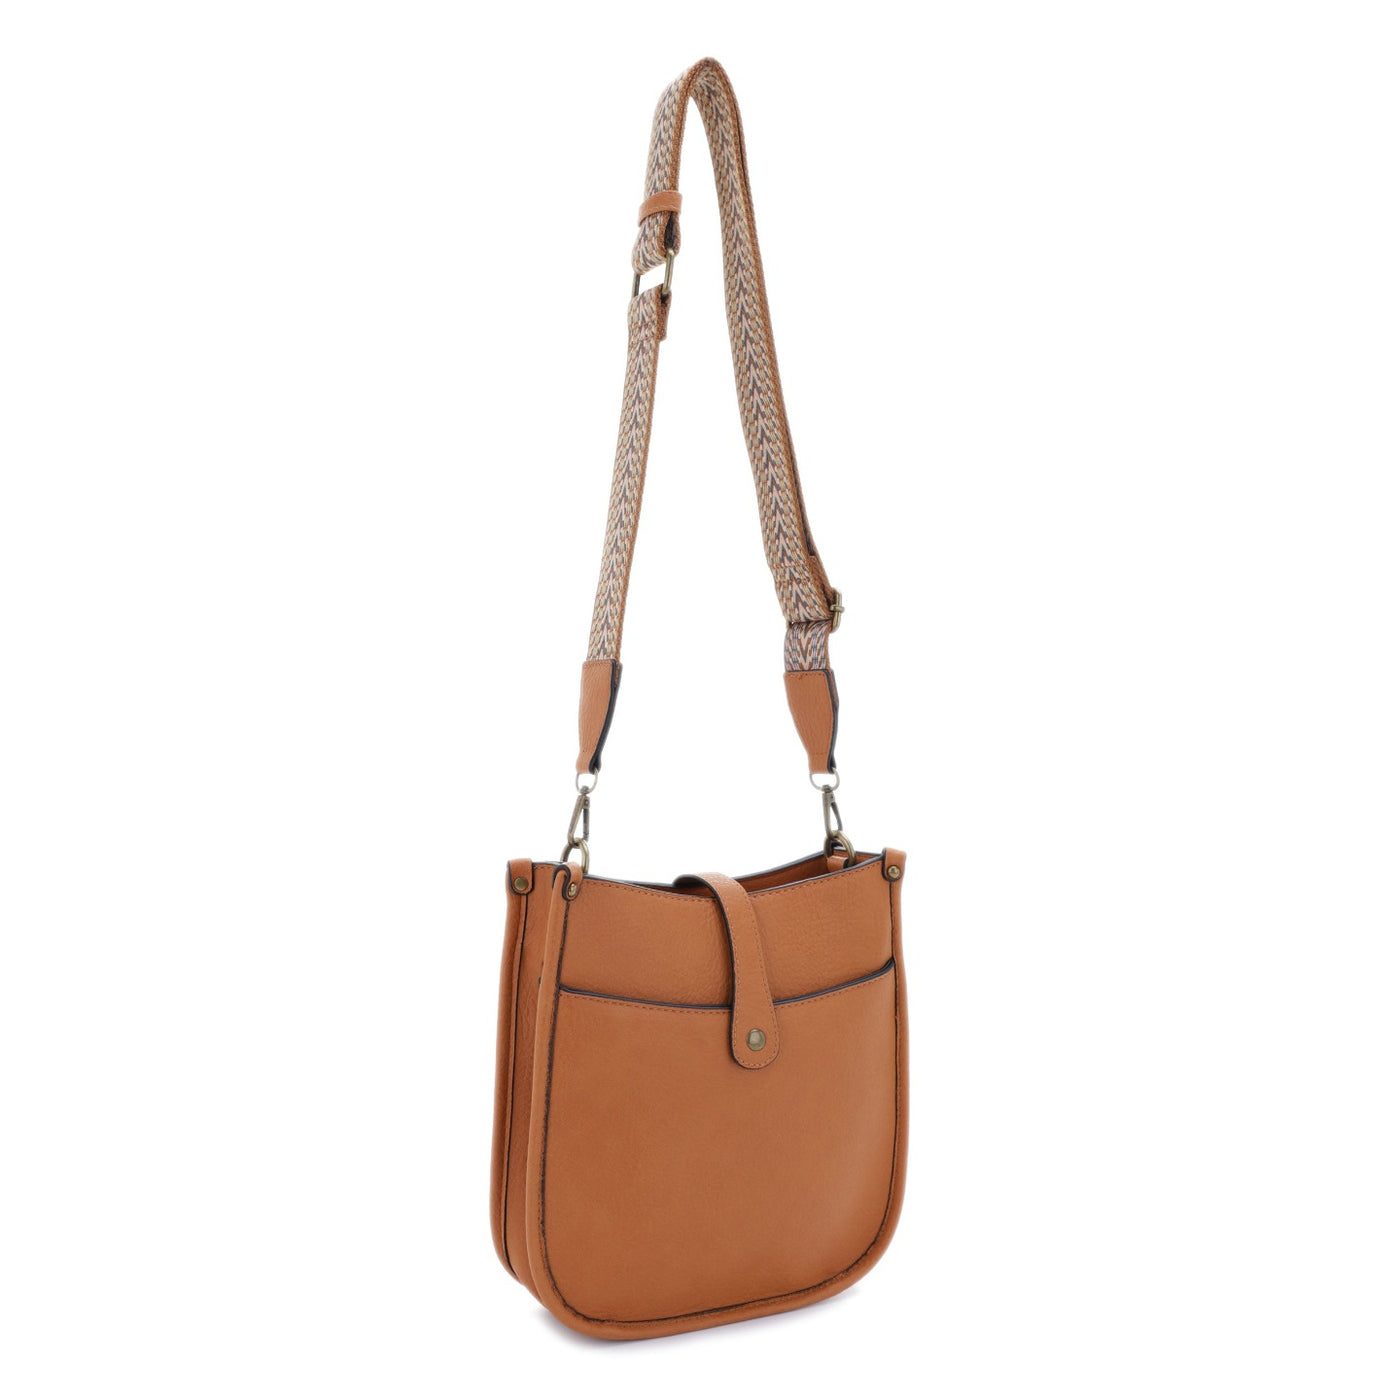 Chelsea Concealed Carry Lock and Key Hobo